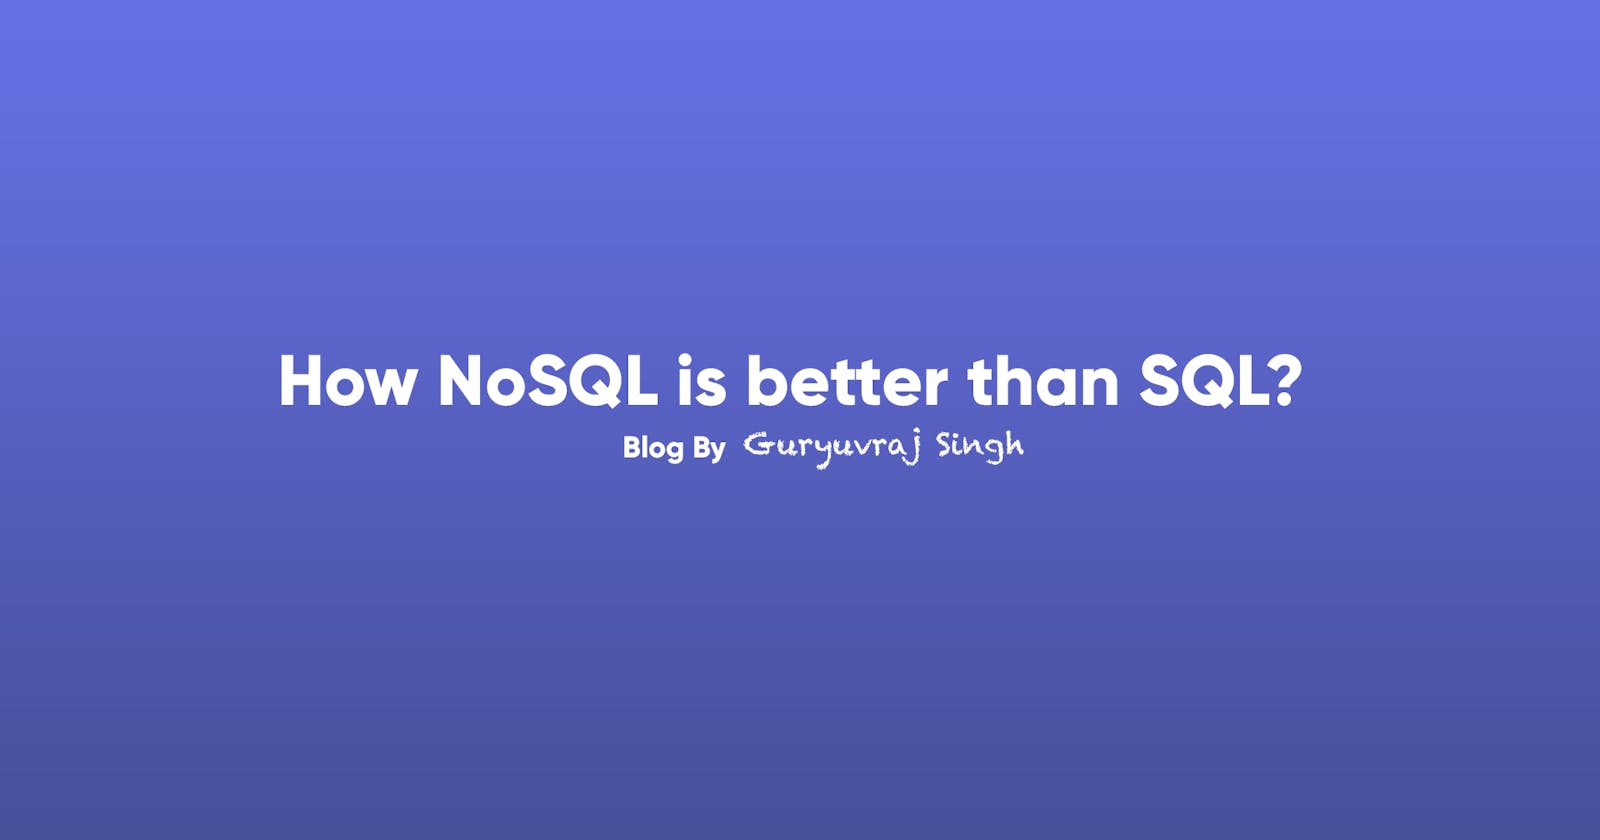 How NoSQL is better than SQL?